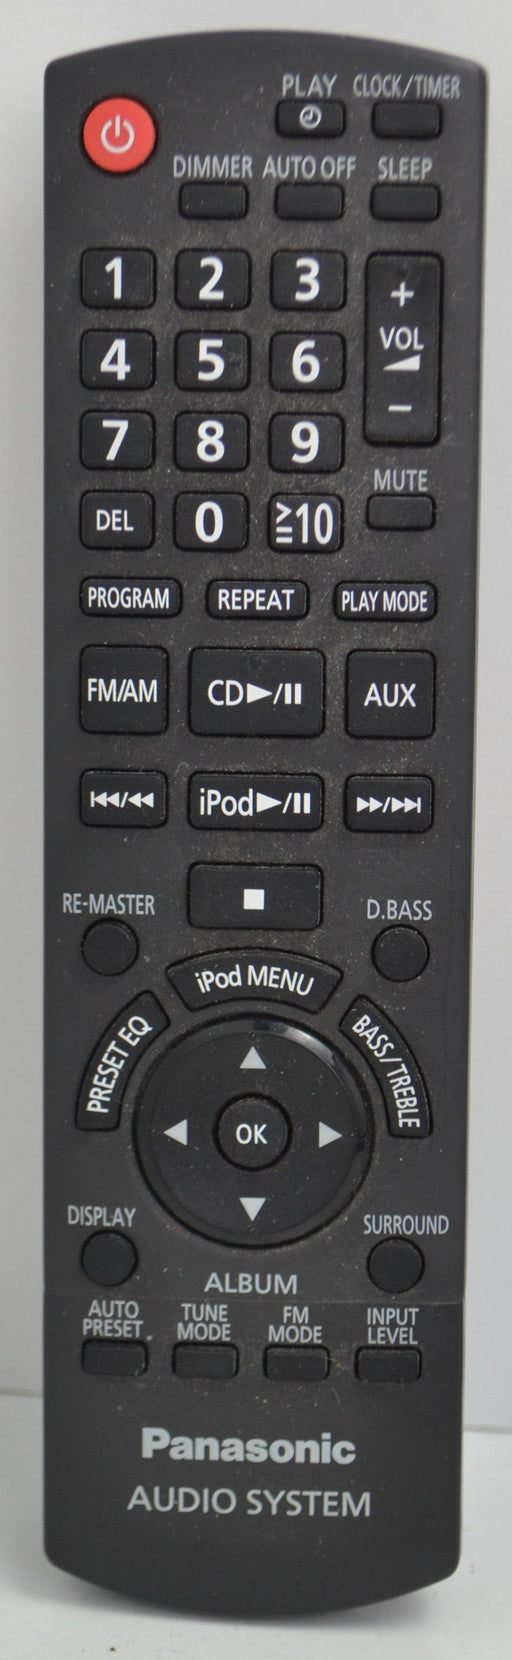 Panasonic - N2QAYB000394 - Audio System - Remote Control - For SC-HC3 SA-HC3 Audio Systems-Remote-SpenCertified-refurbished-vintage-electonics